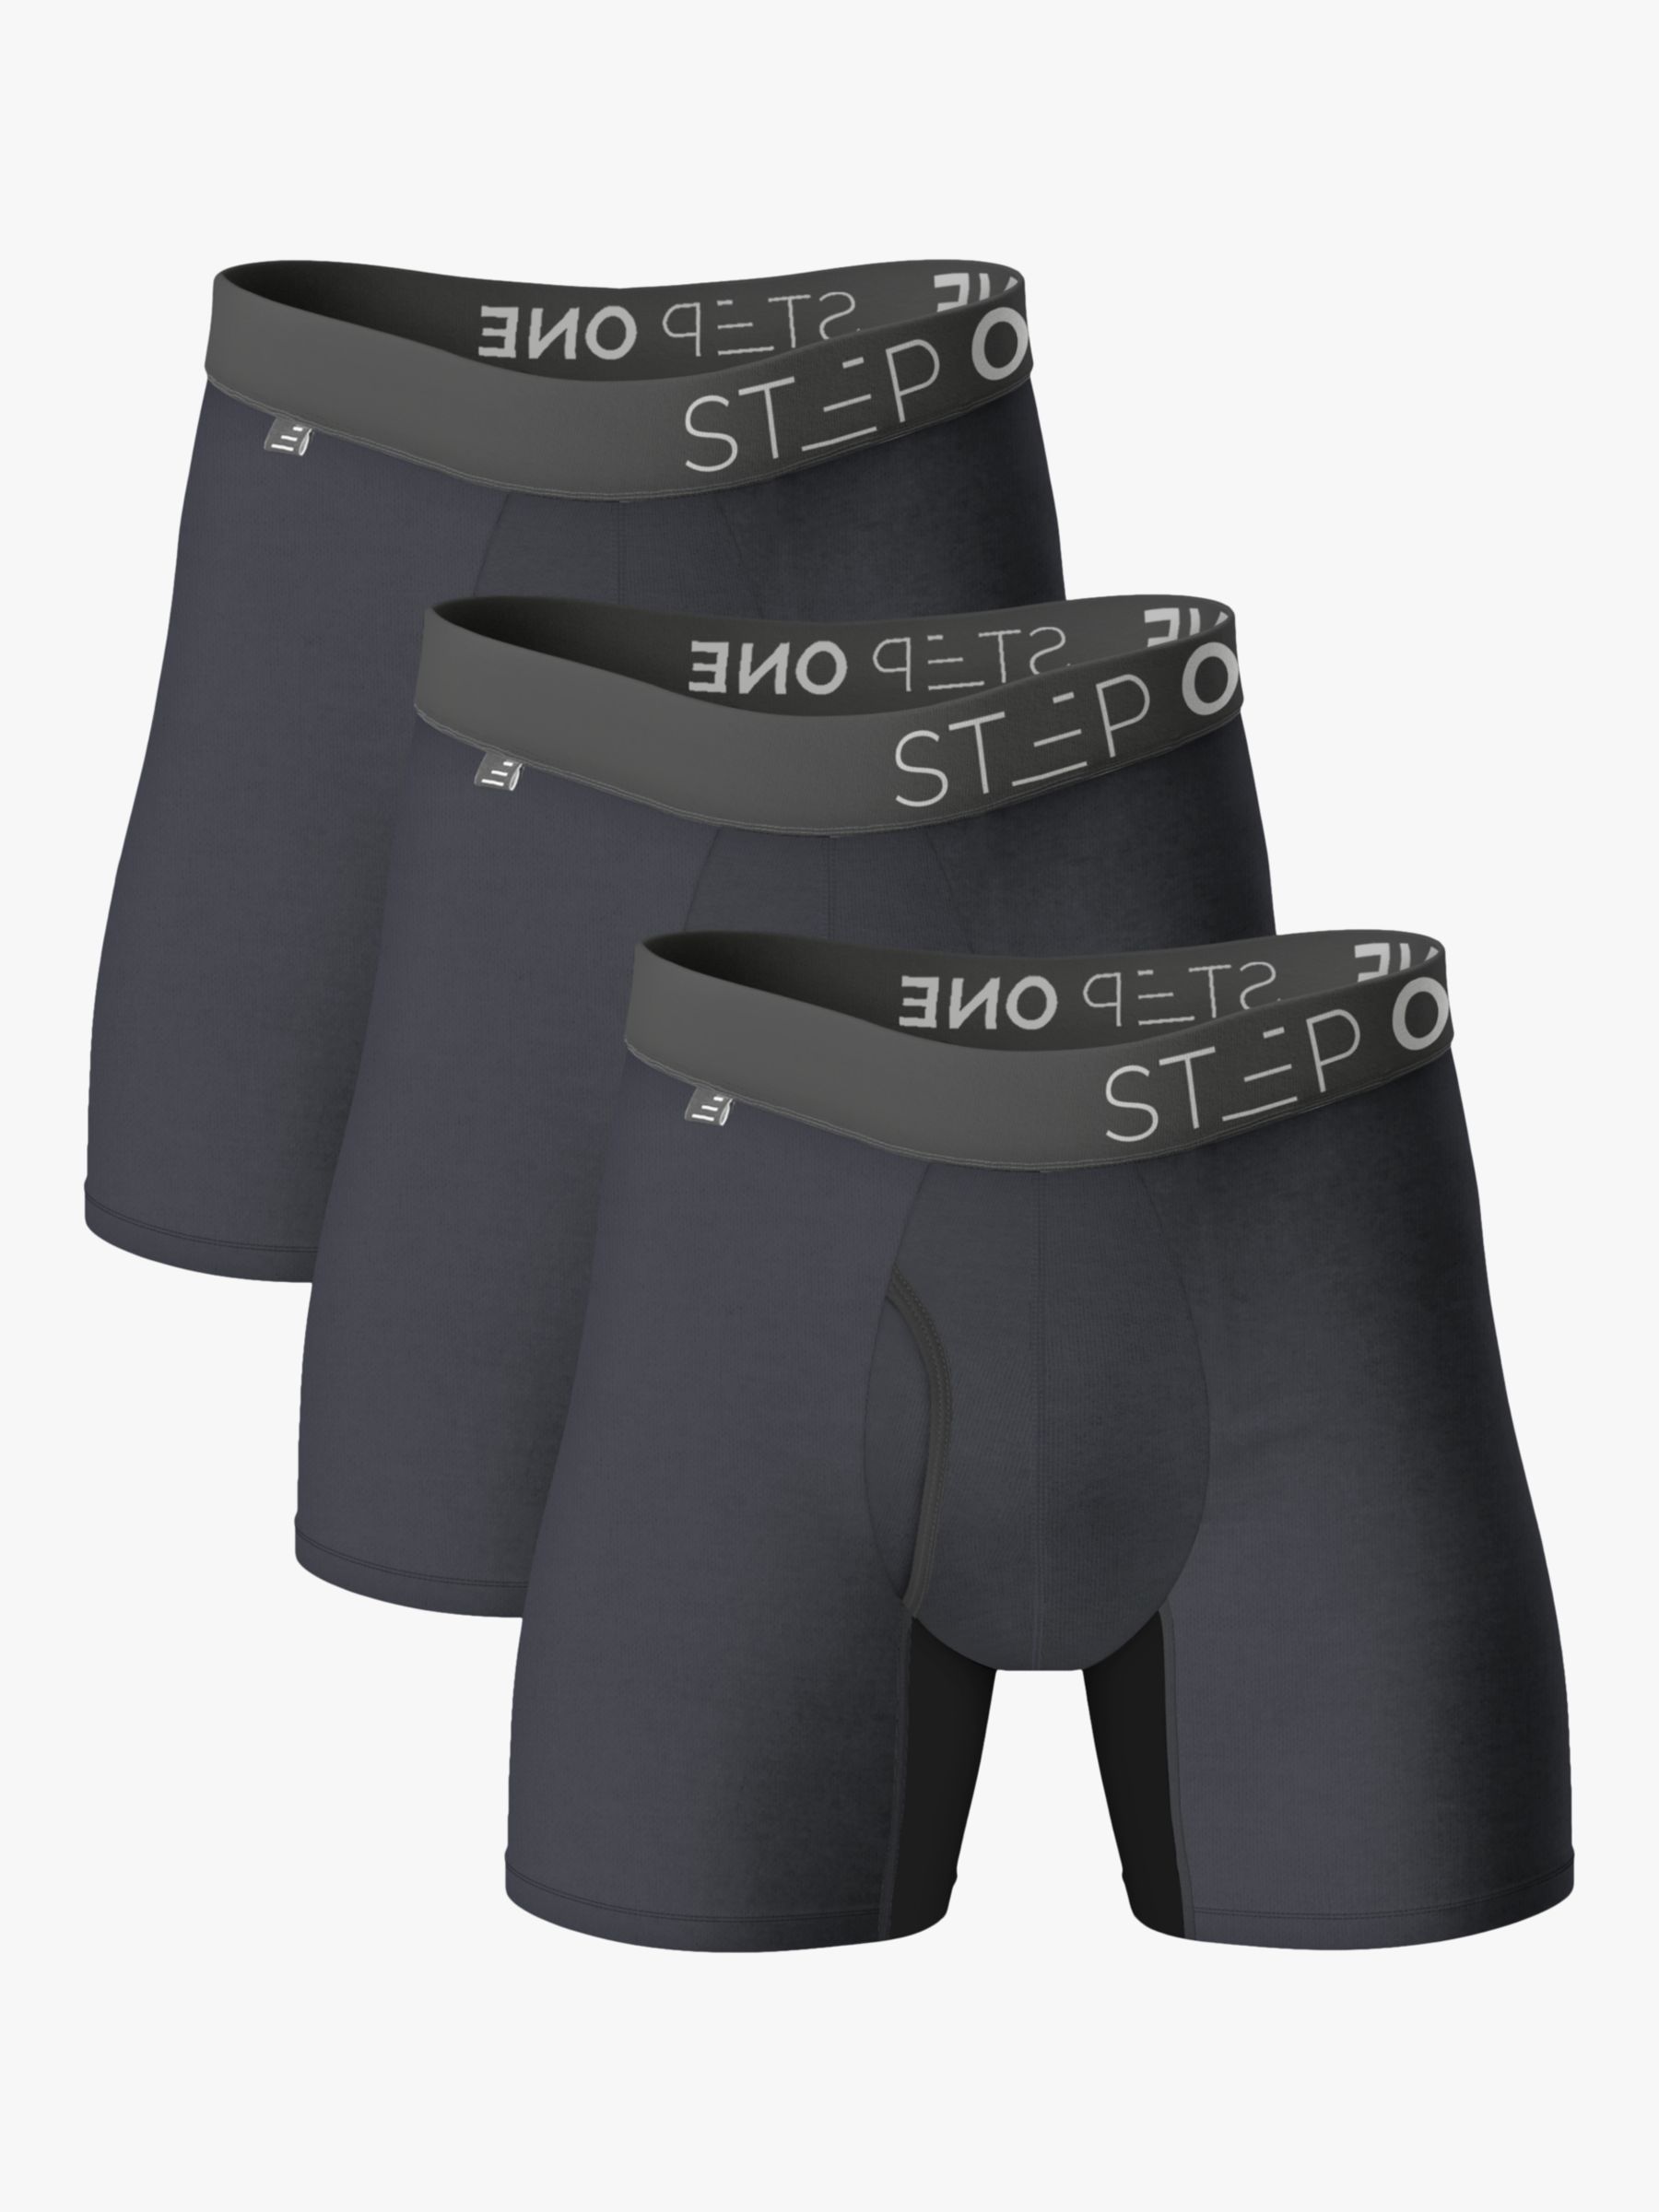 Step One Bamboo Boxer Briefs With Fly, Pack of 3, Smoking Guns at